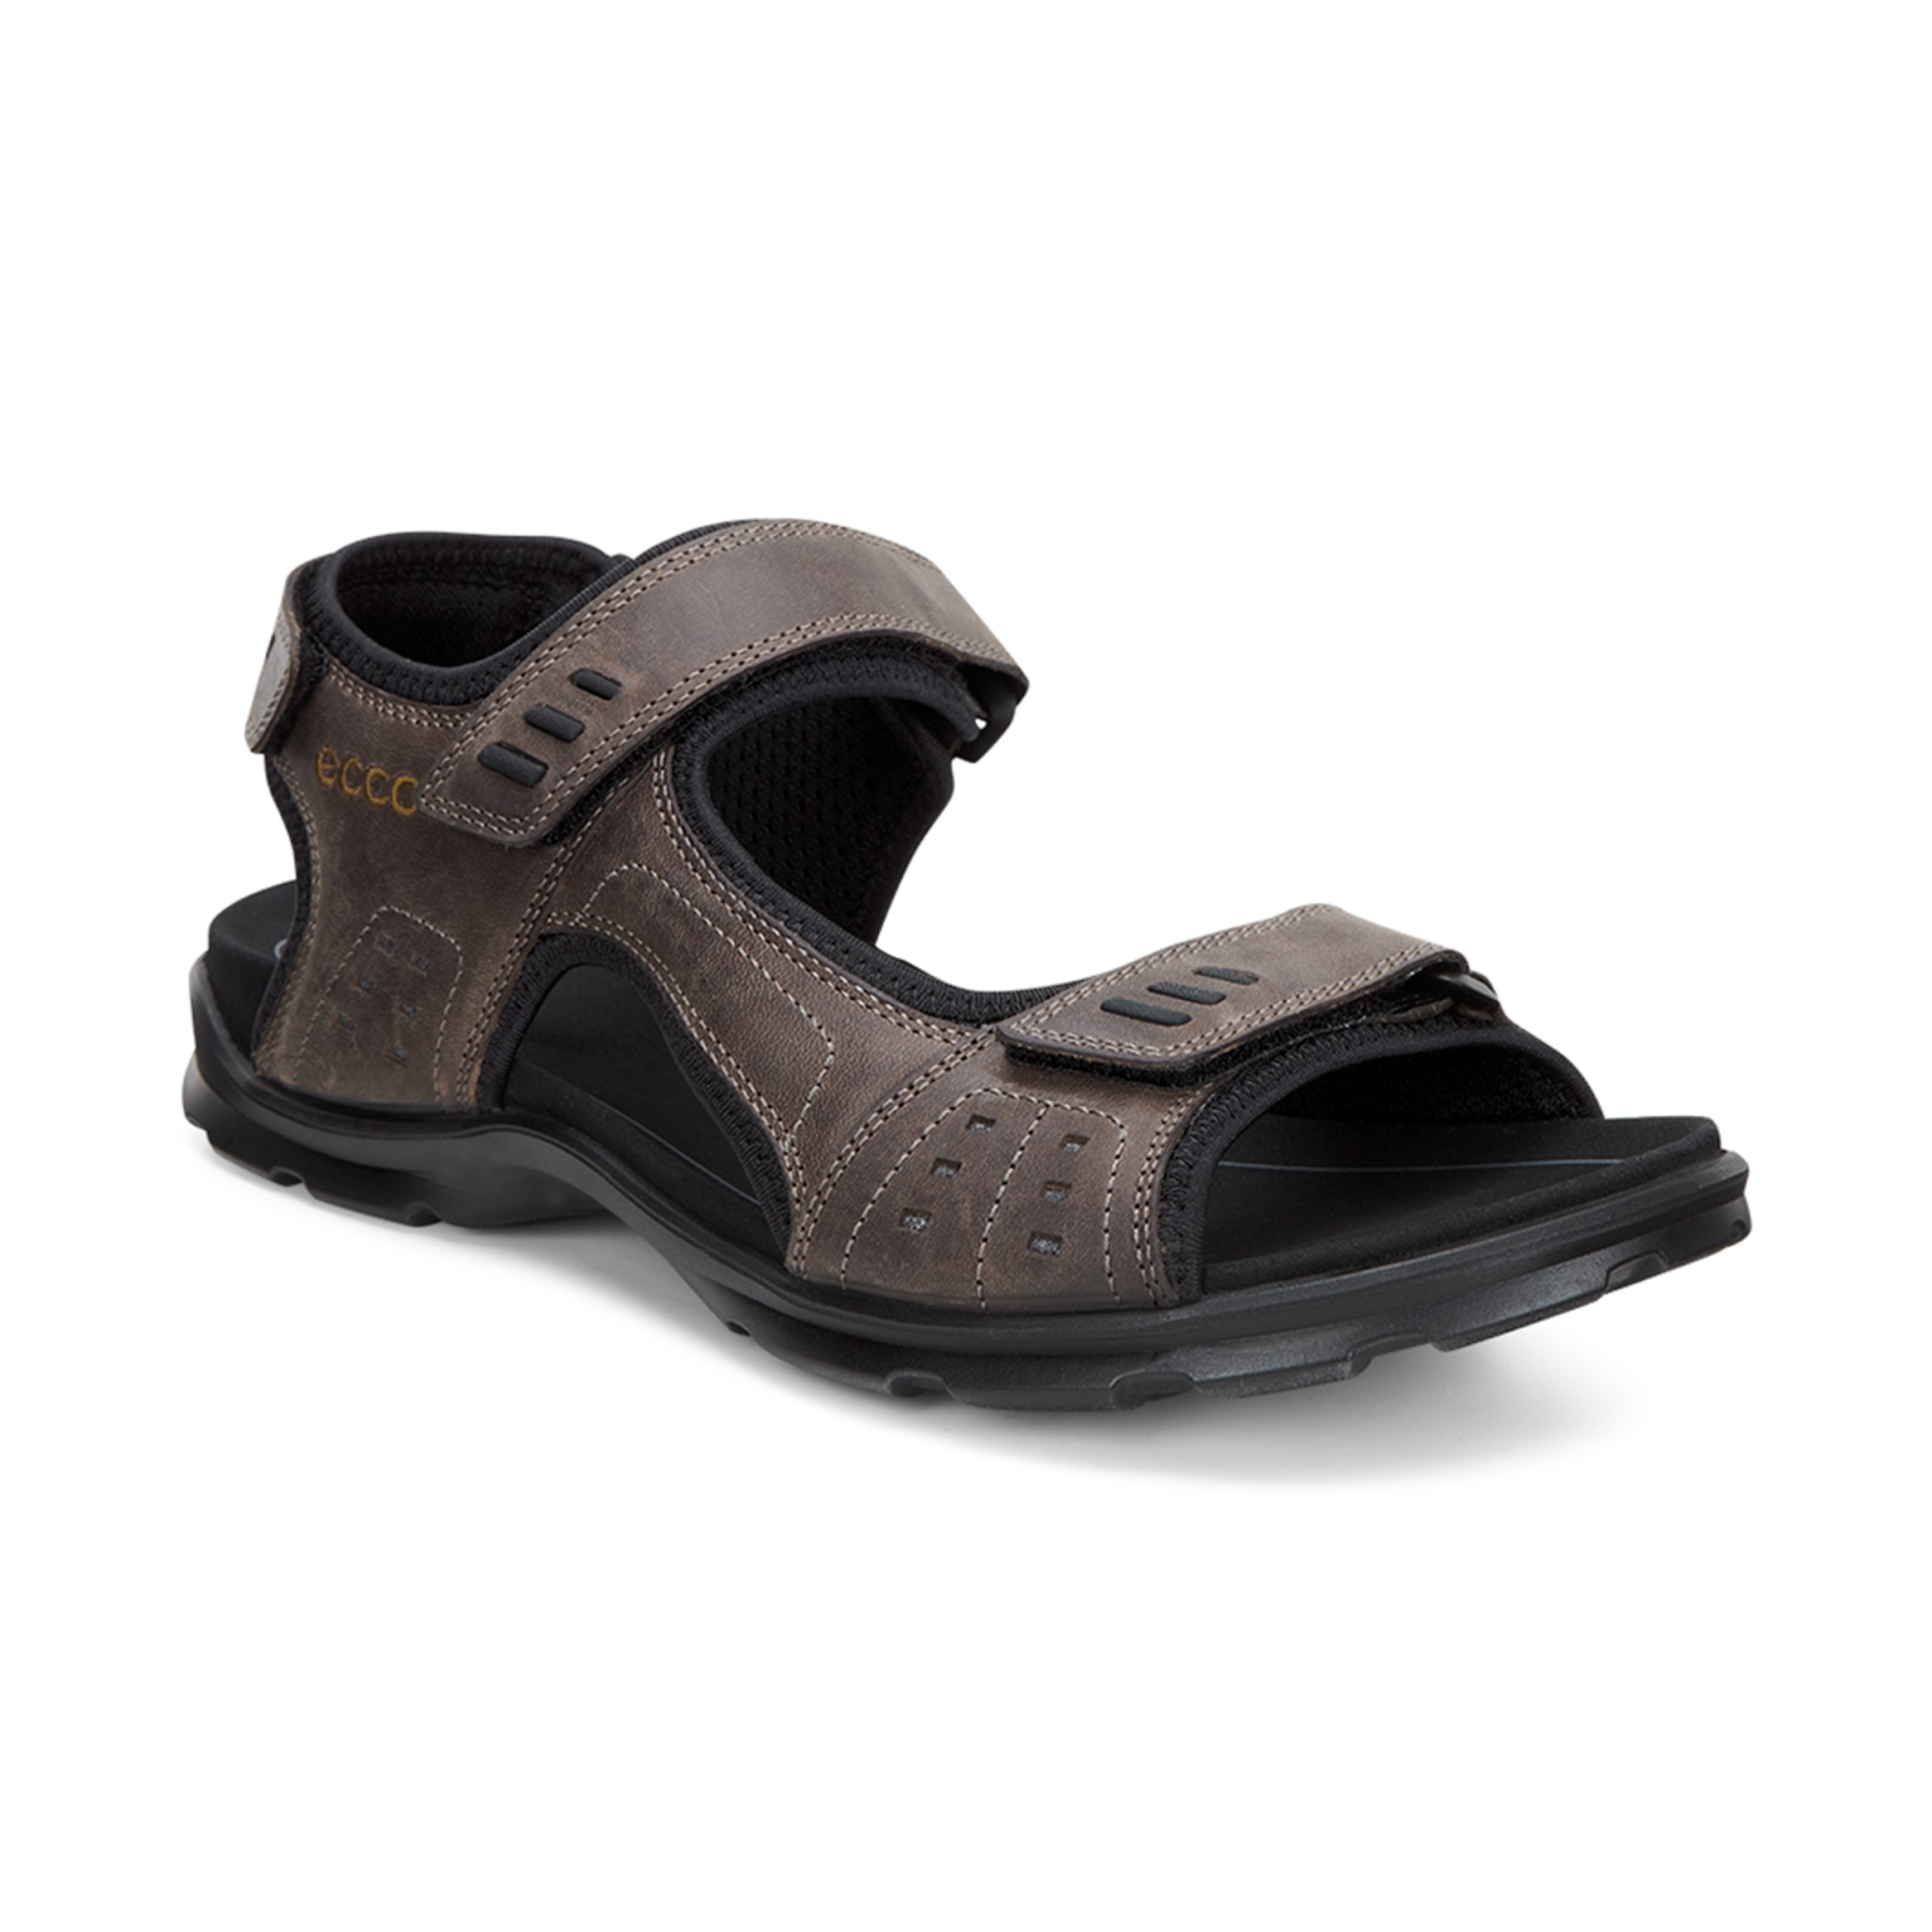 FALSK Kan ignoreres prinsesse Ecco Mens Utah Sandal 46 - Products - Veryk Mall - Veryk Mall, many  product, quick response, safe your money!